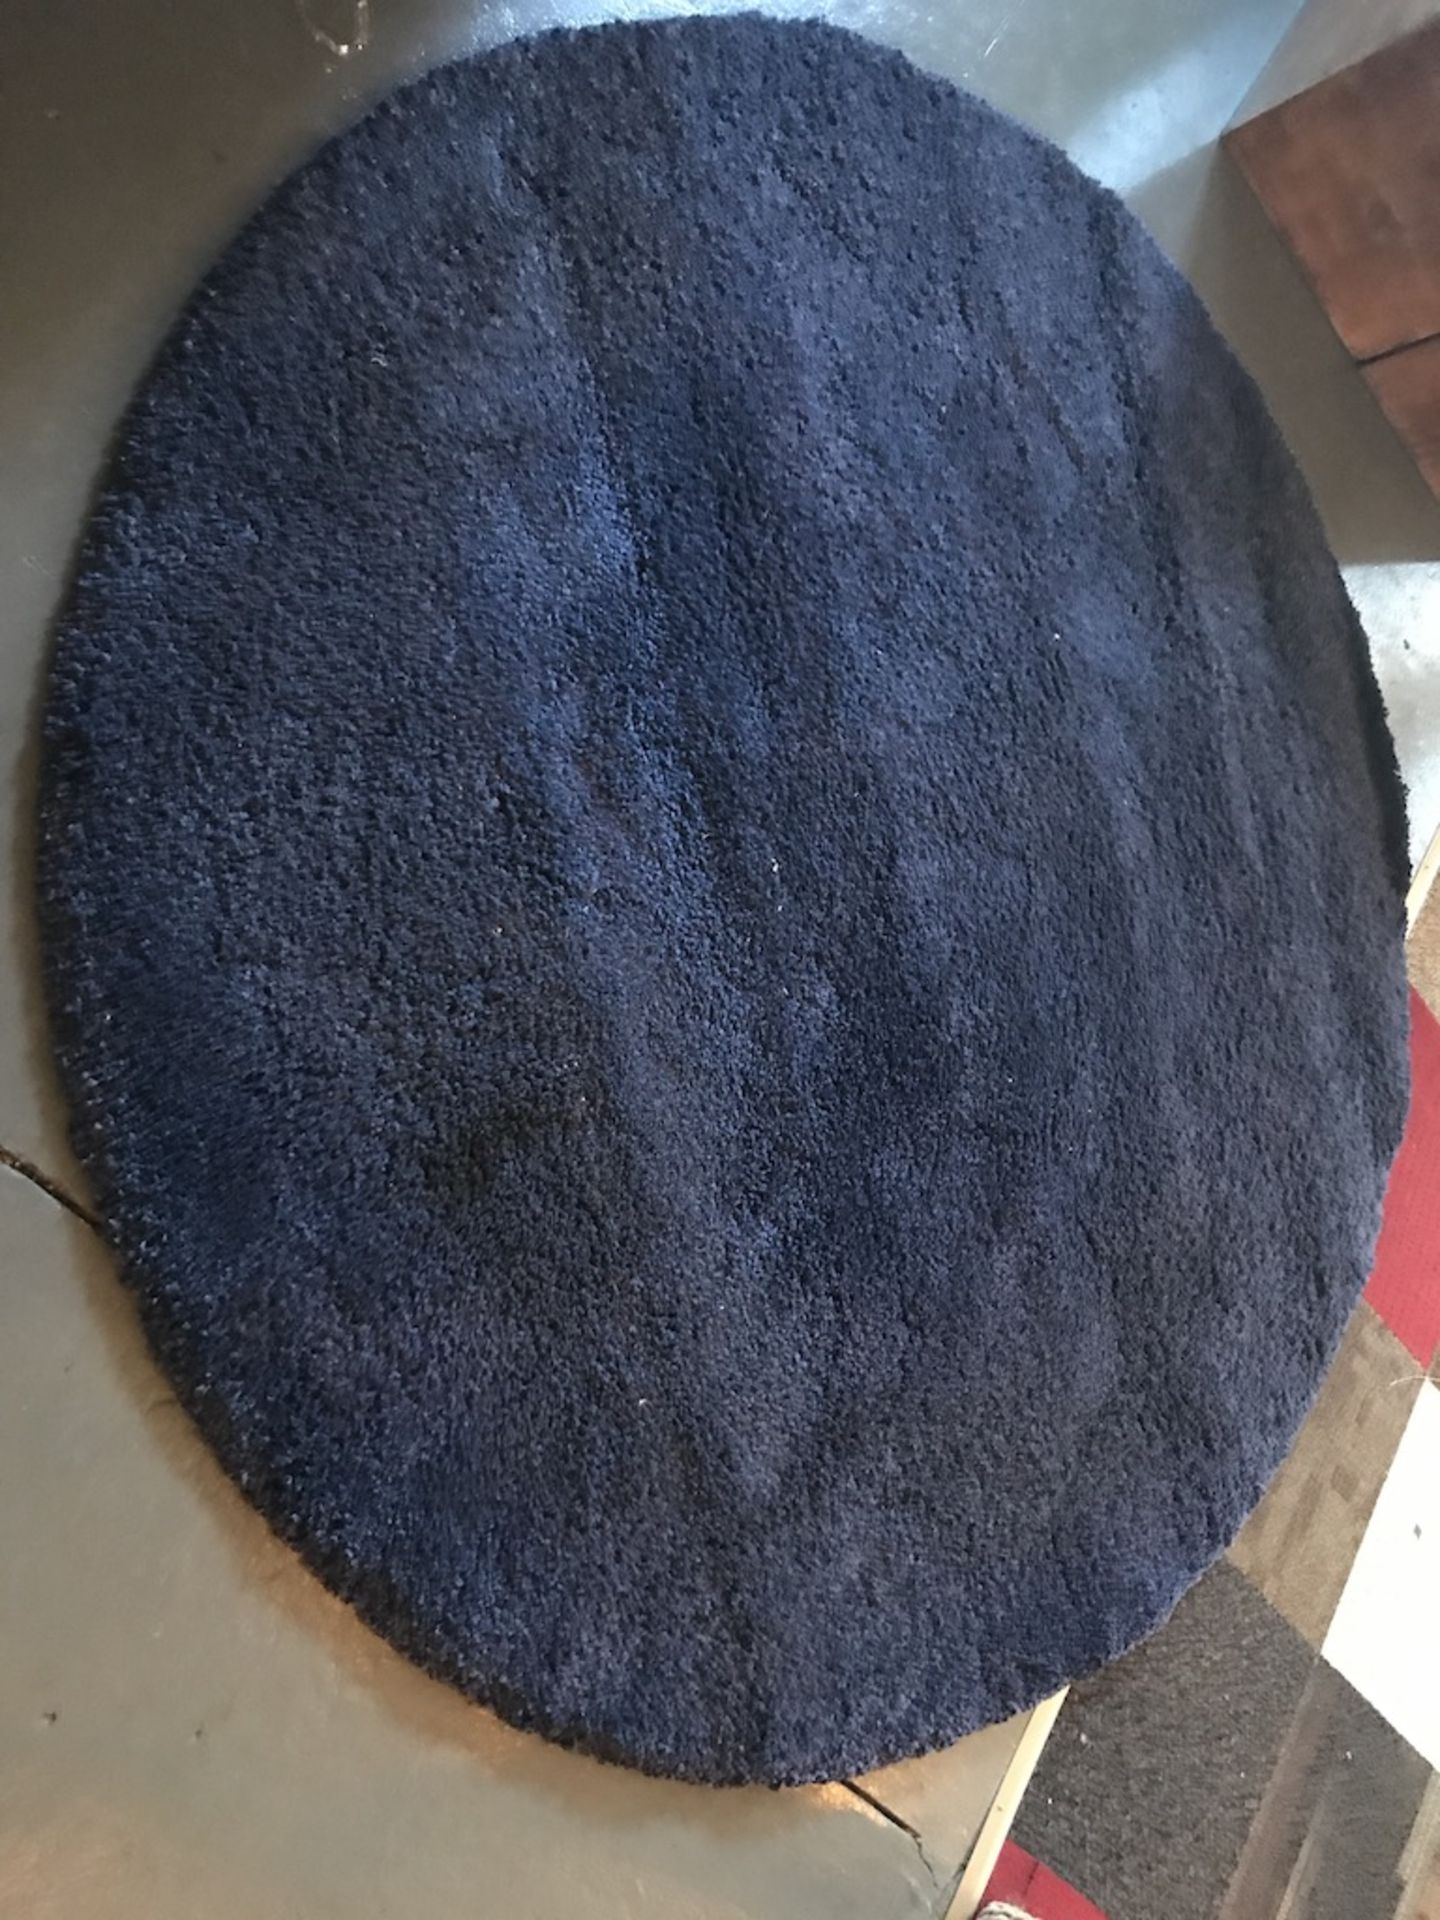 LOT OF: (4) 33" WIDE RUNNER FLOOR MATS AND (1) 7' ROUND BLUE RUG